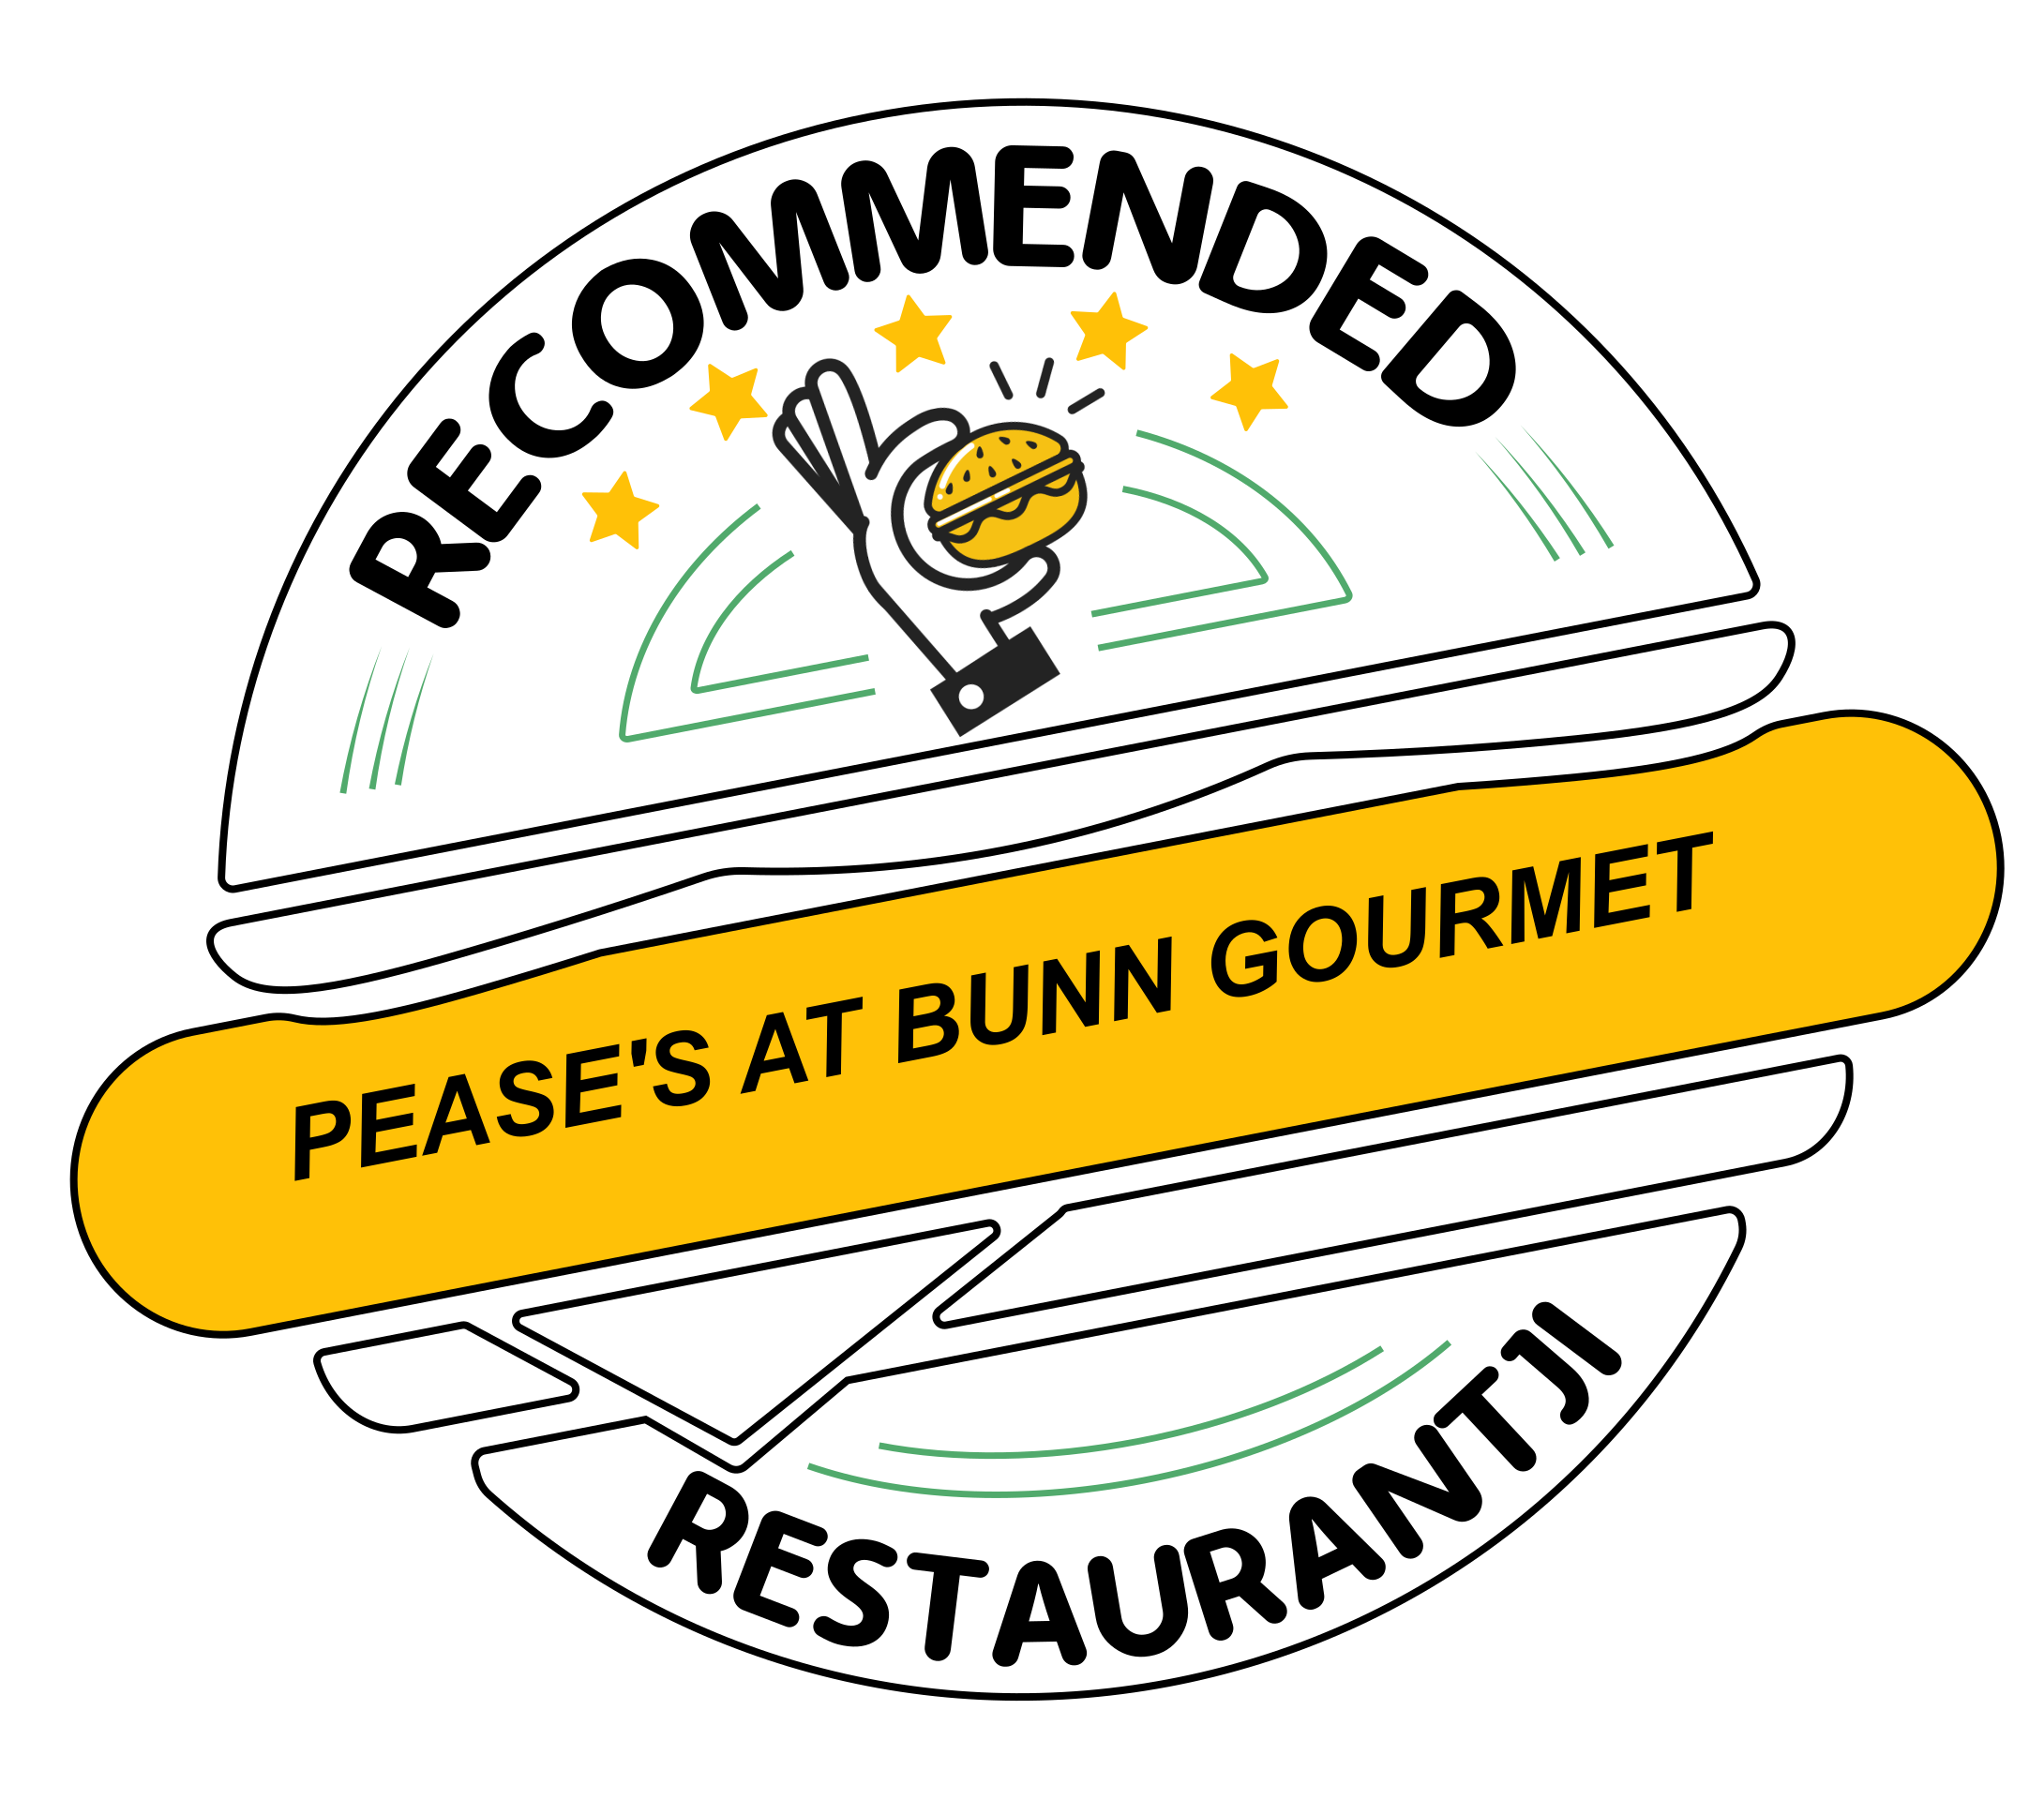 Pease's at Bunn Gourmet is a go-to spot on Restaurantji - a platform featuring over 1,000,000 restaurants across the USA and Canada.